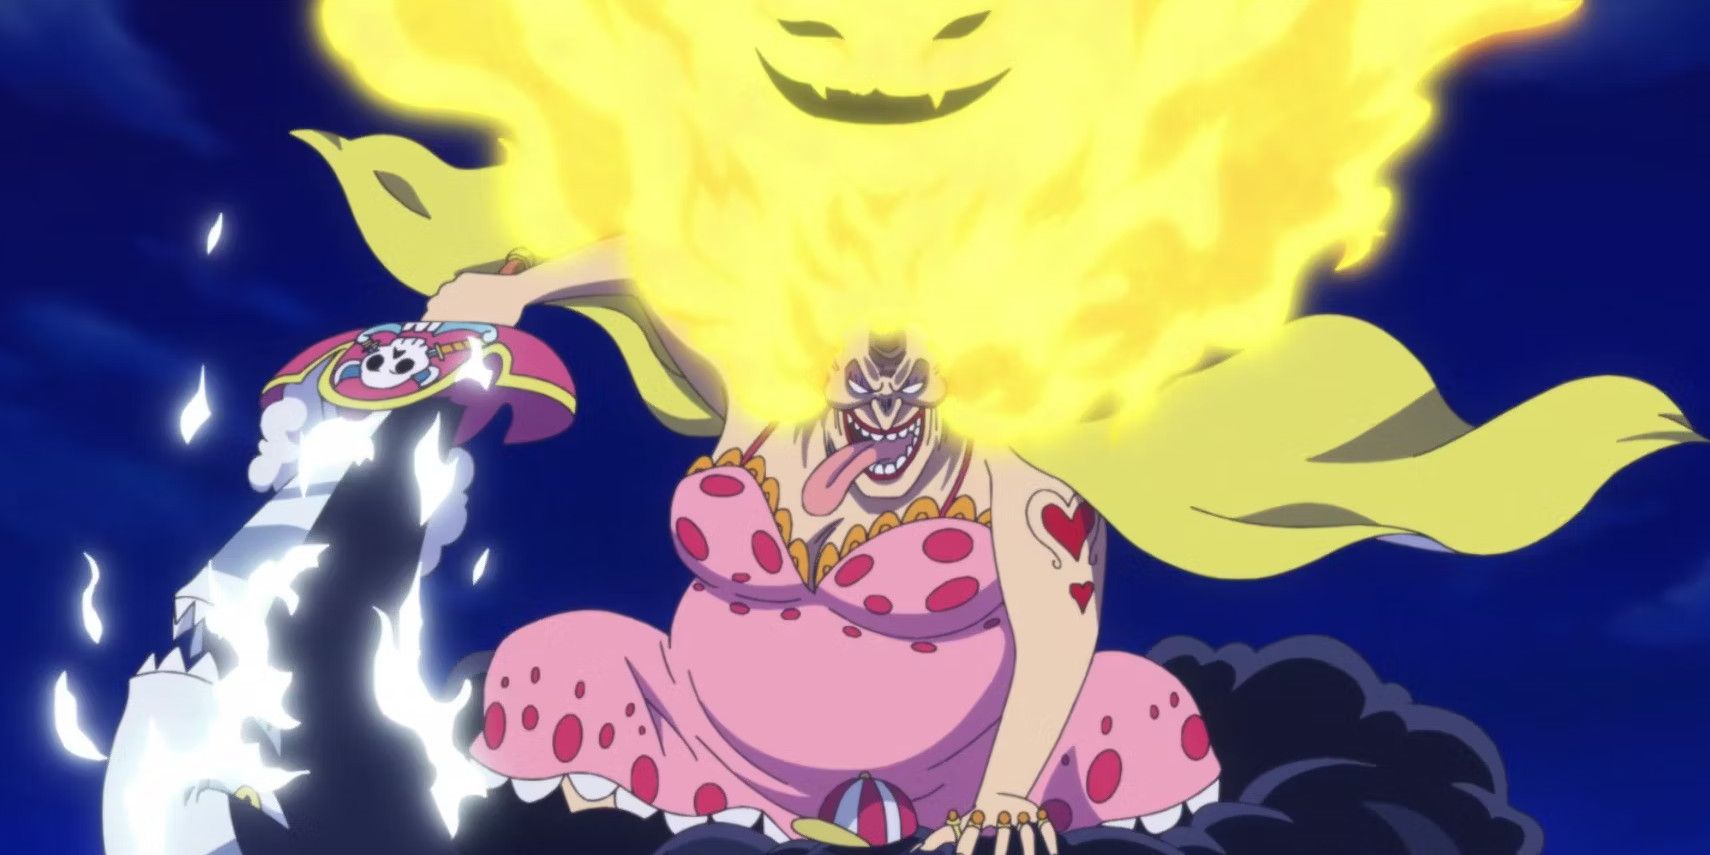 Furious Grandmother riding Zeus to attack the Straw Hats in one piece.